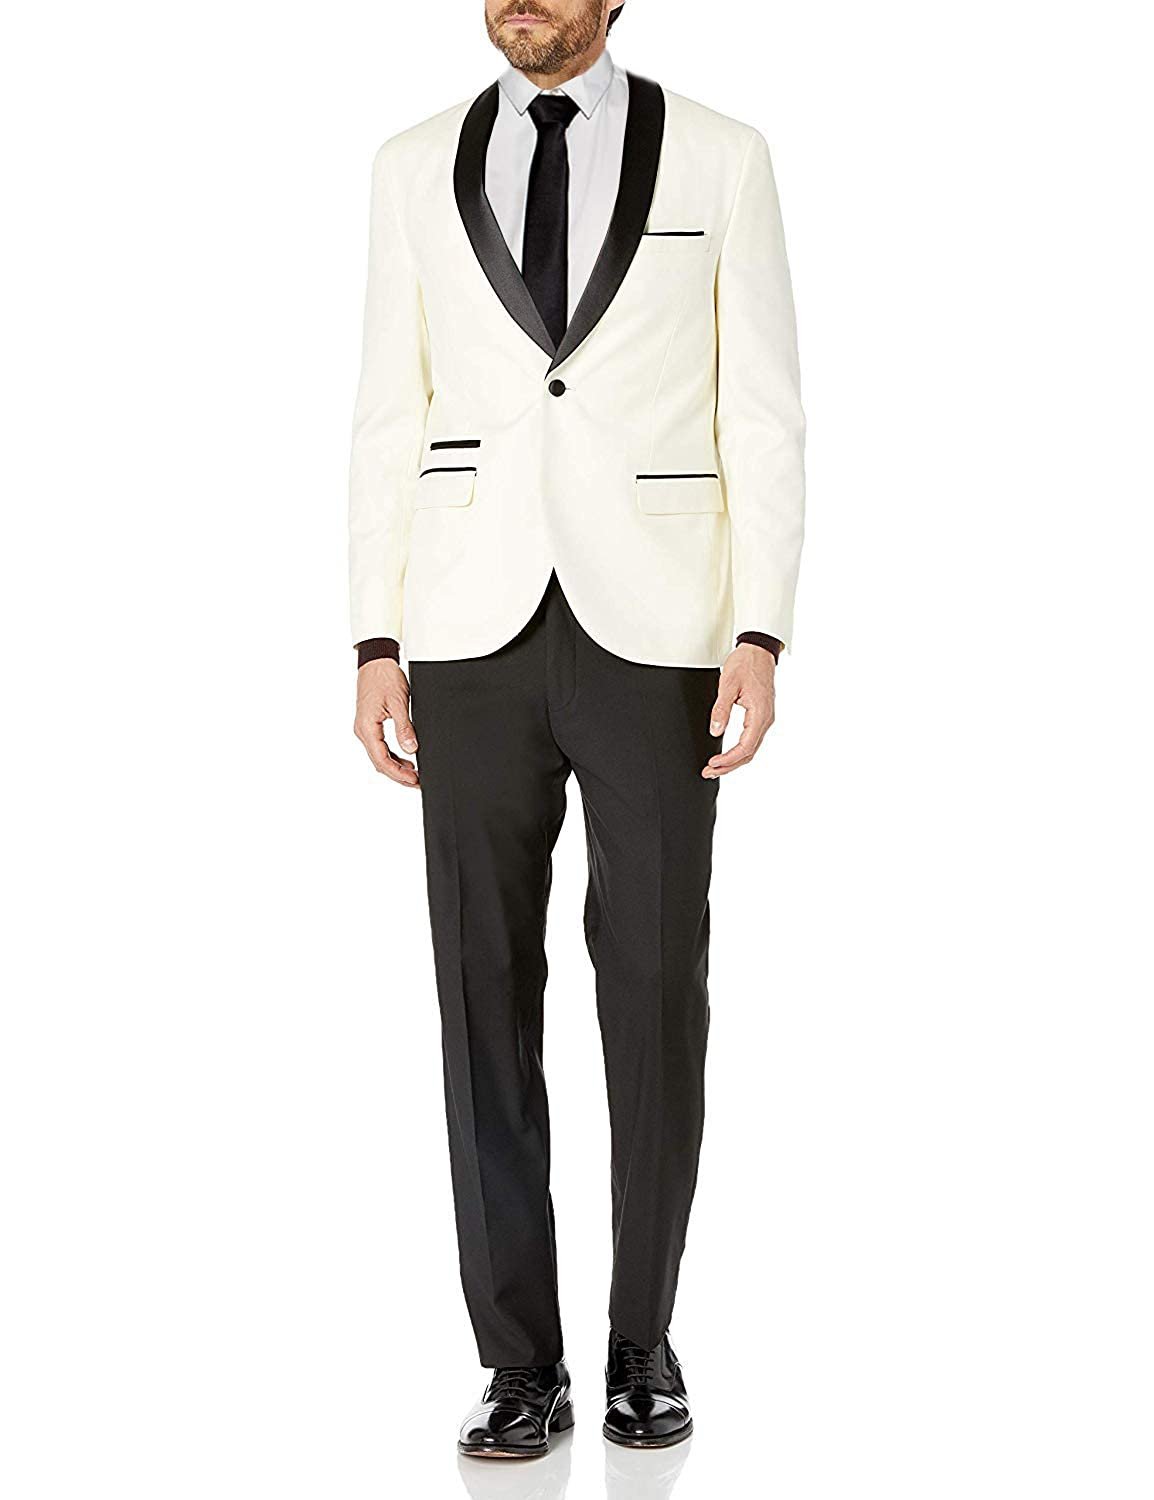 Available in Colors Adam Baker Mens Slim Fit One Button Satin Shawl Collar 2-Piece Tuxedo Suit